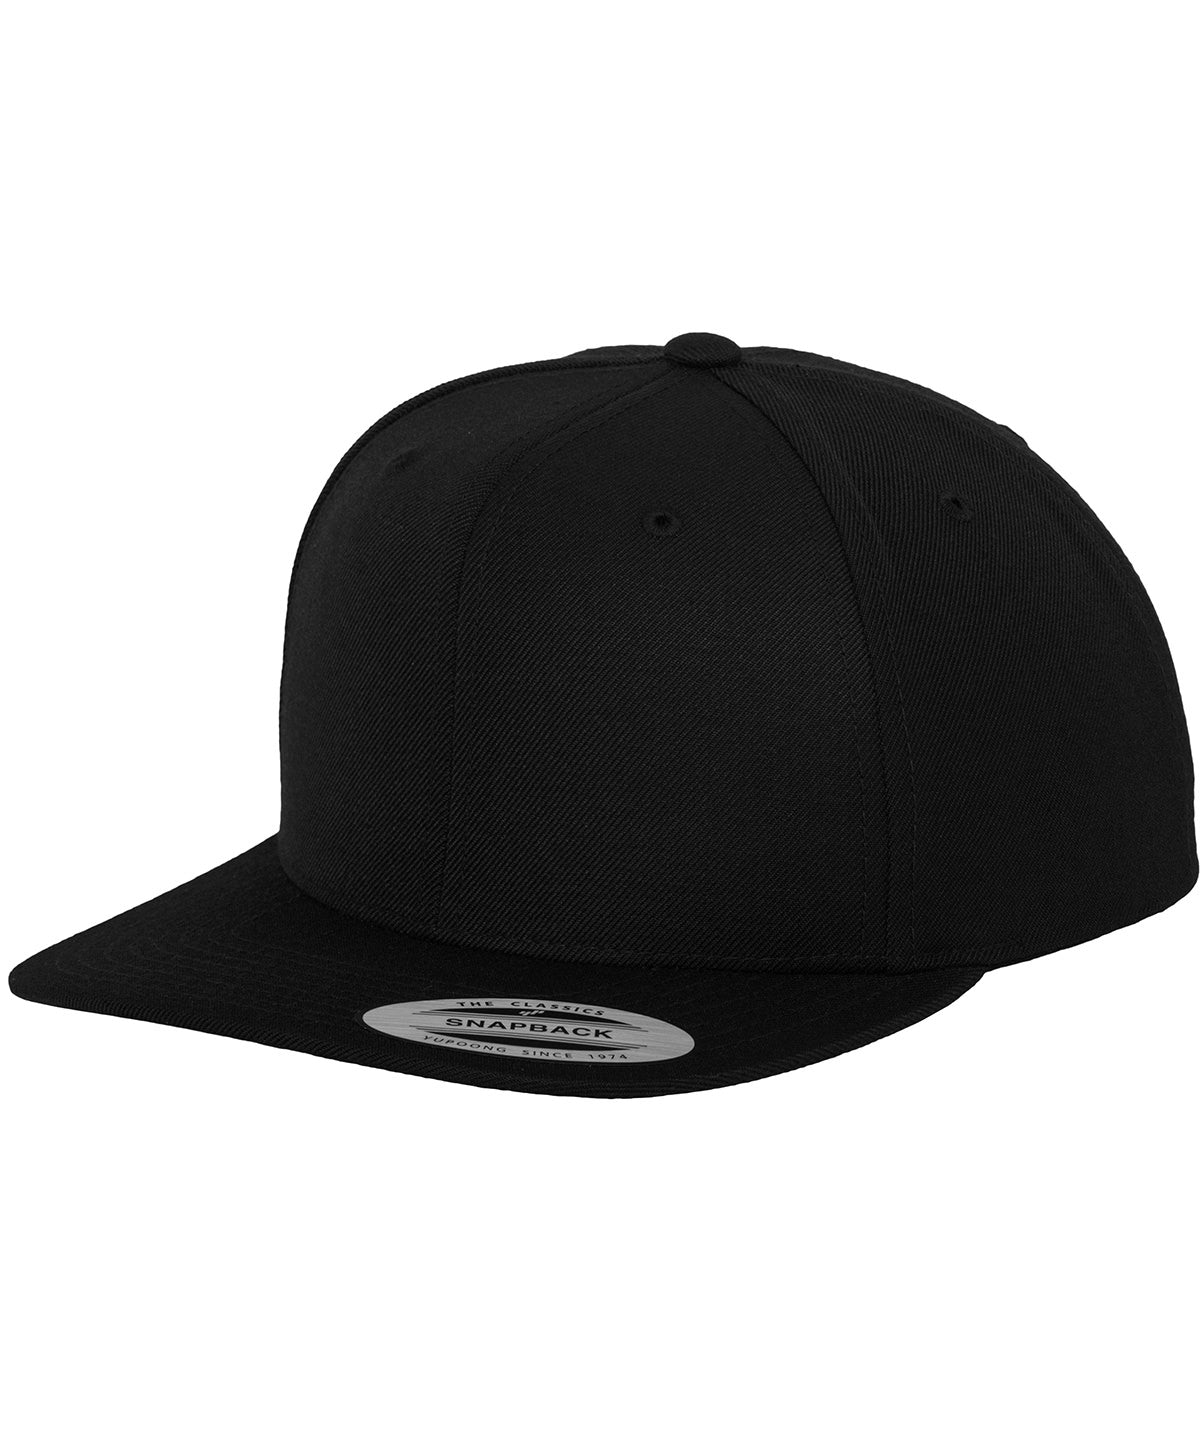 Black - The classic snapback (6089M) Caps Flexfit by Yupoong Headwear, Must Haves, New Colours for 2023, Rebrandable, Streetwear Schoolwear Centres